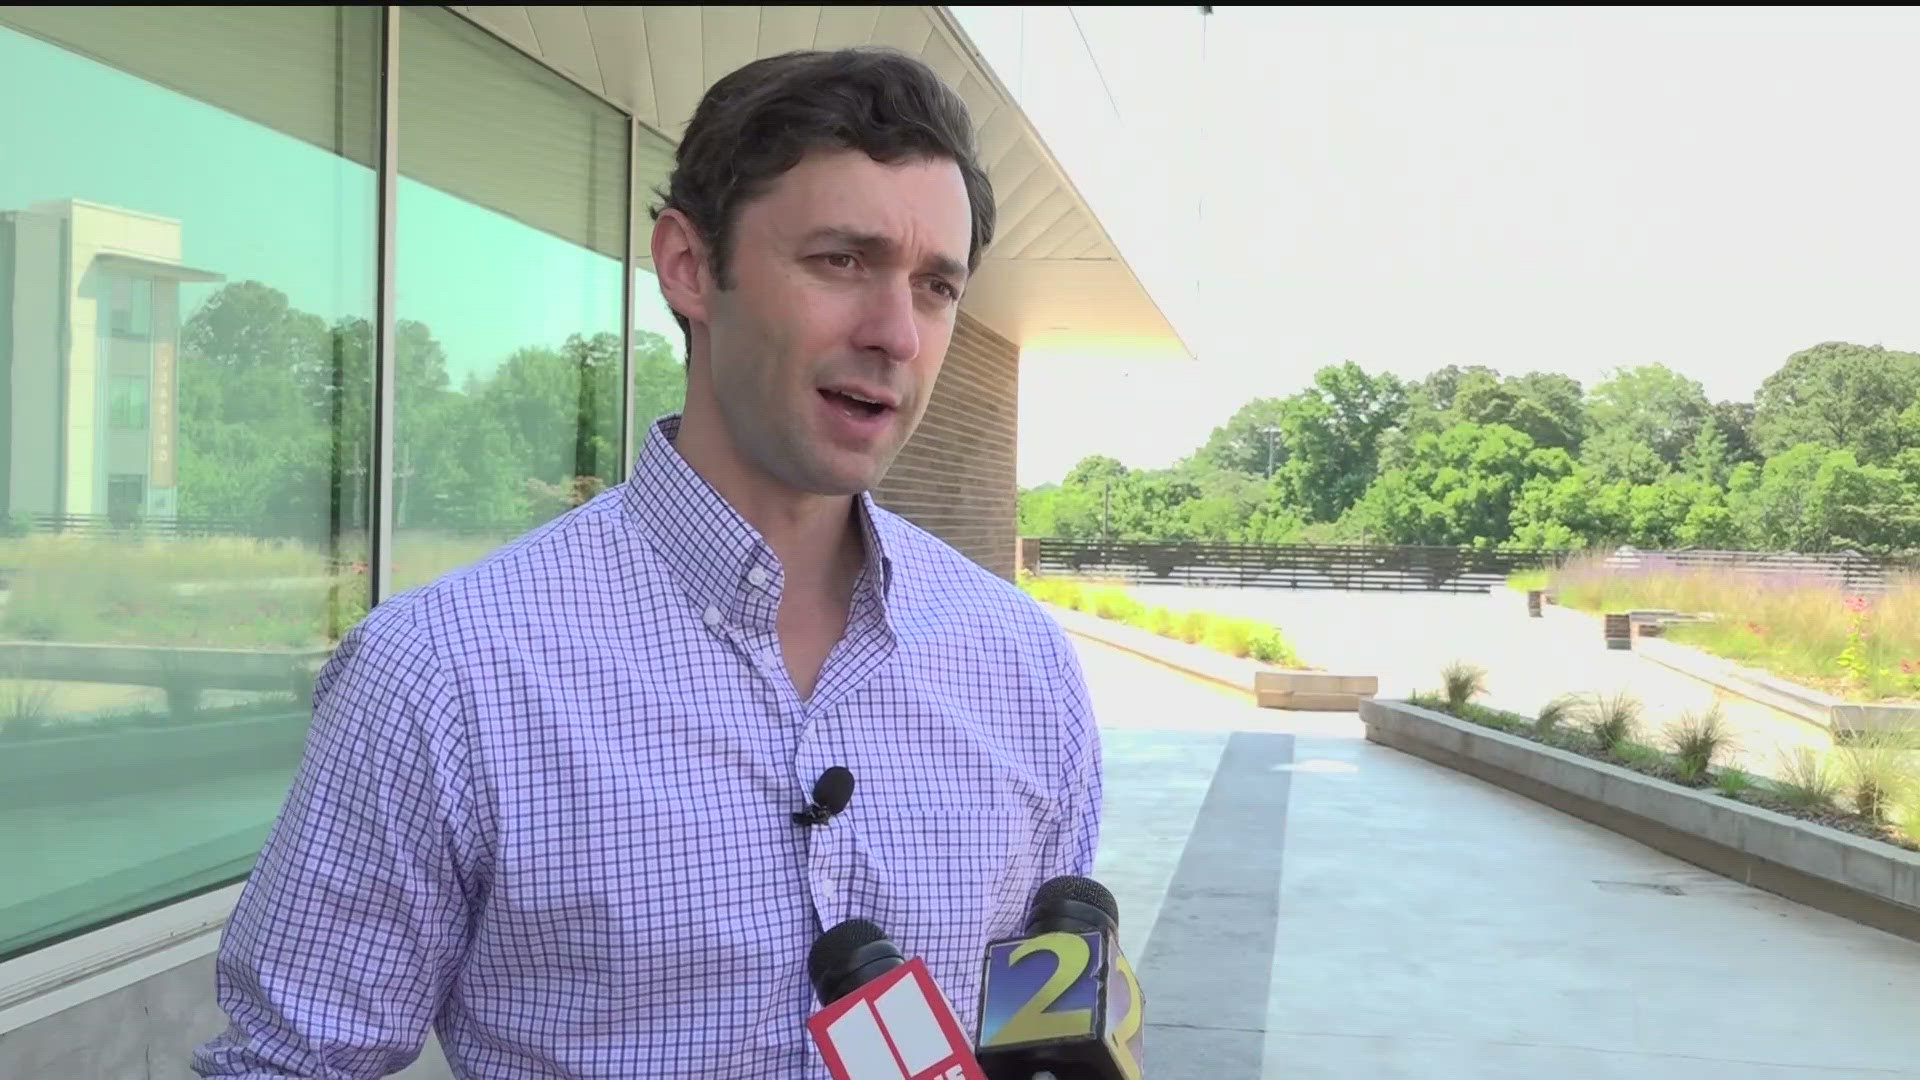 The deadline for updates on the postal service delay is rapidly approaching. Senator Jon Ossoff says he will continue to add pressure onto postal service officials.